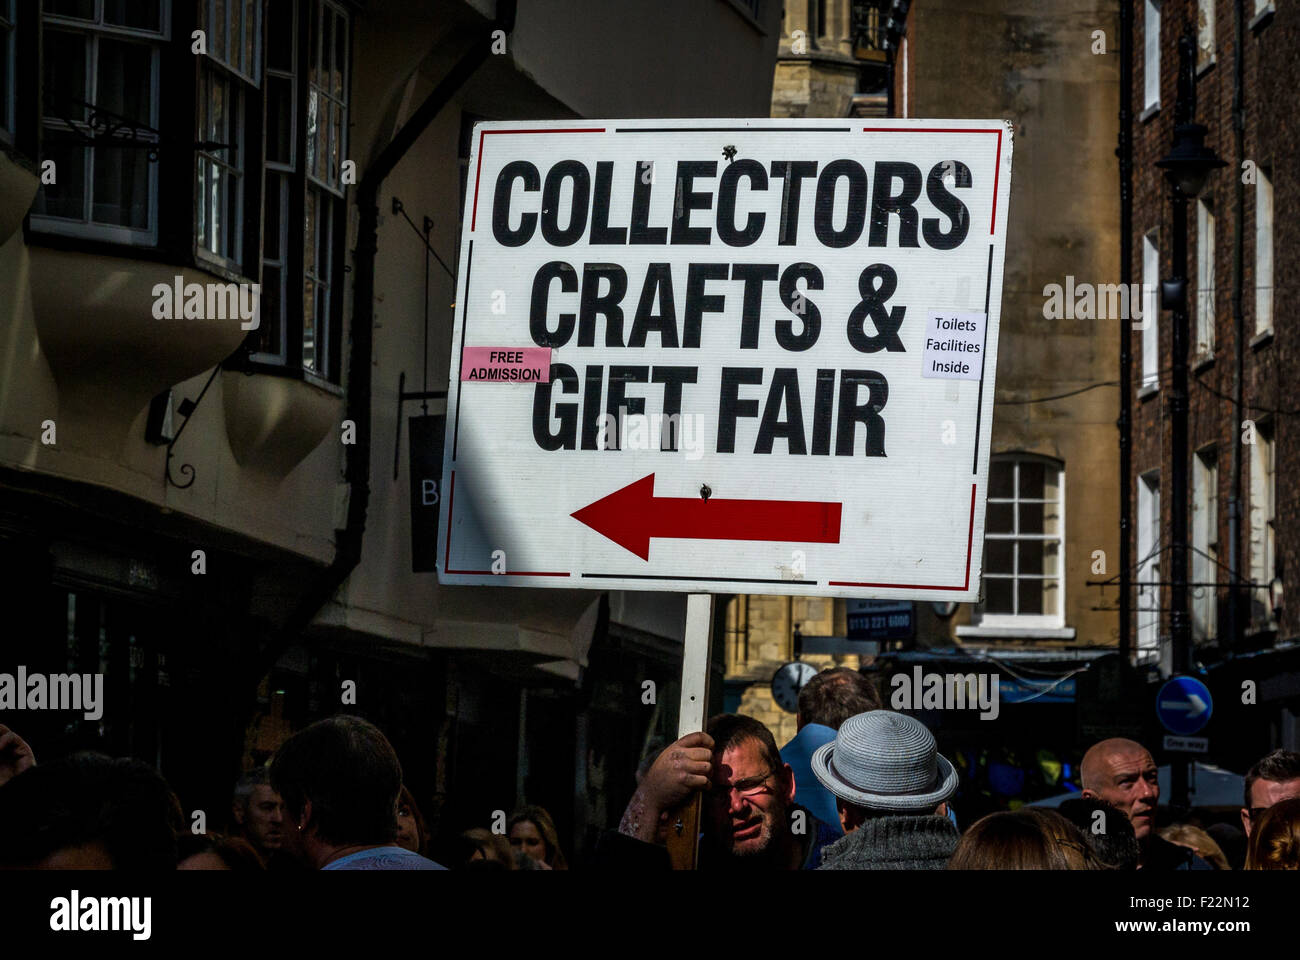 Collectors Crafts and Gift Fair placard, York city centre. Stock Photo